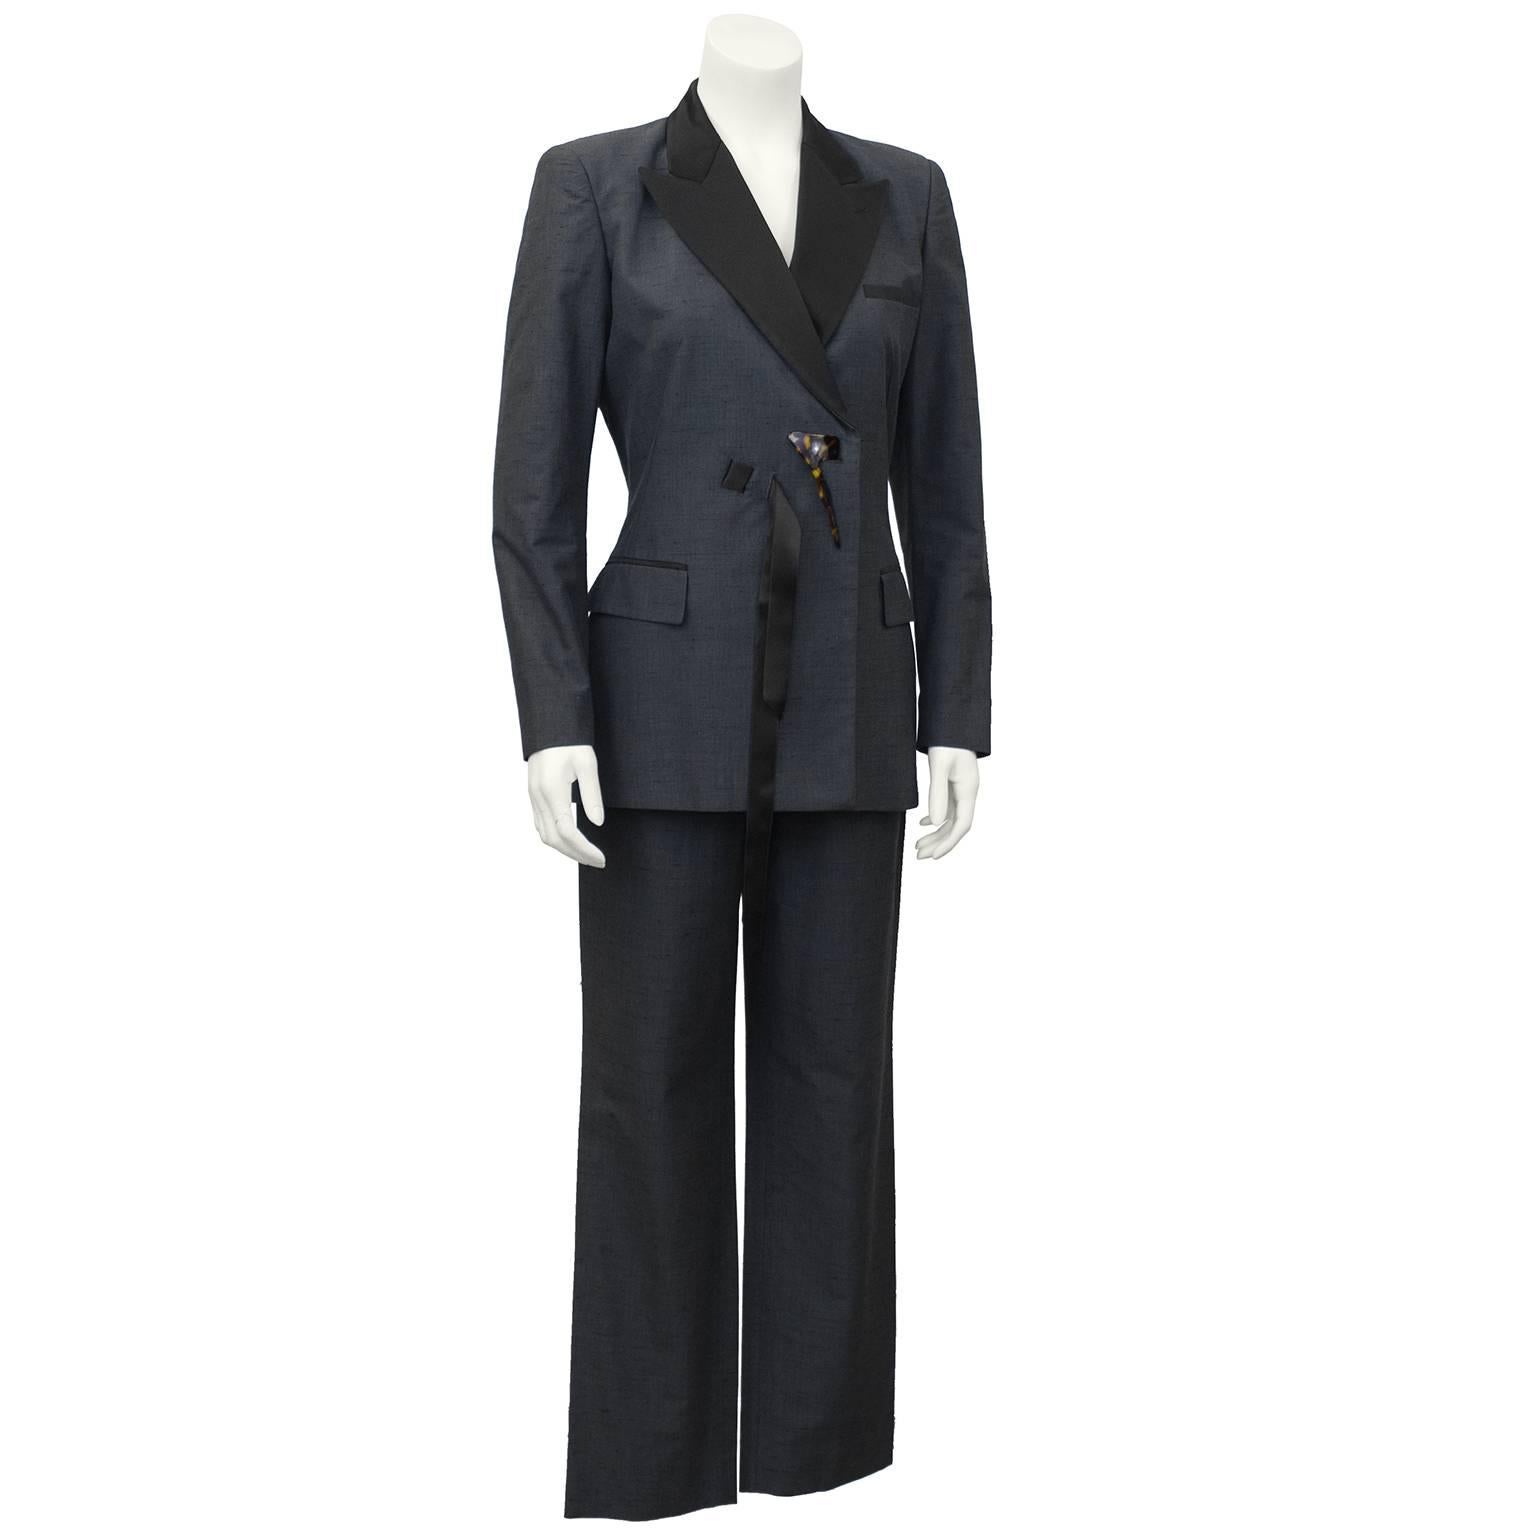 1990's Jean Paul Gaultier grey and black tuxedo style pant suit with unusual Spanish mantilla style hair piece as jacket fastener. Alternate fastening with black satin ribbon. Black lapels and trim on breast pocket and and jacket flap pockets.